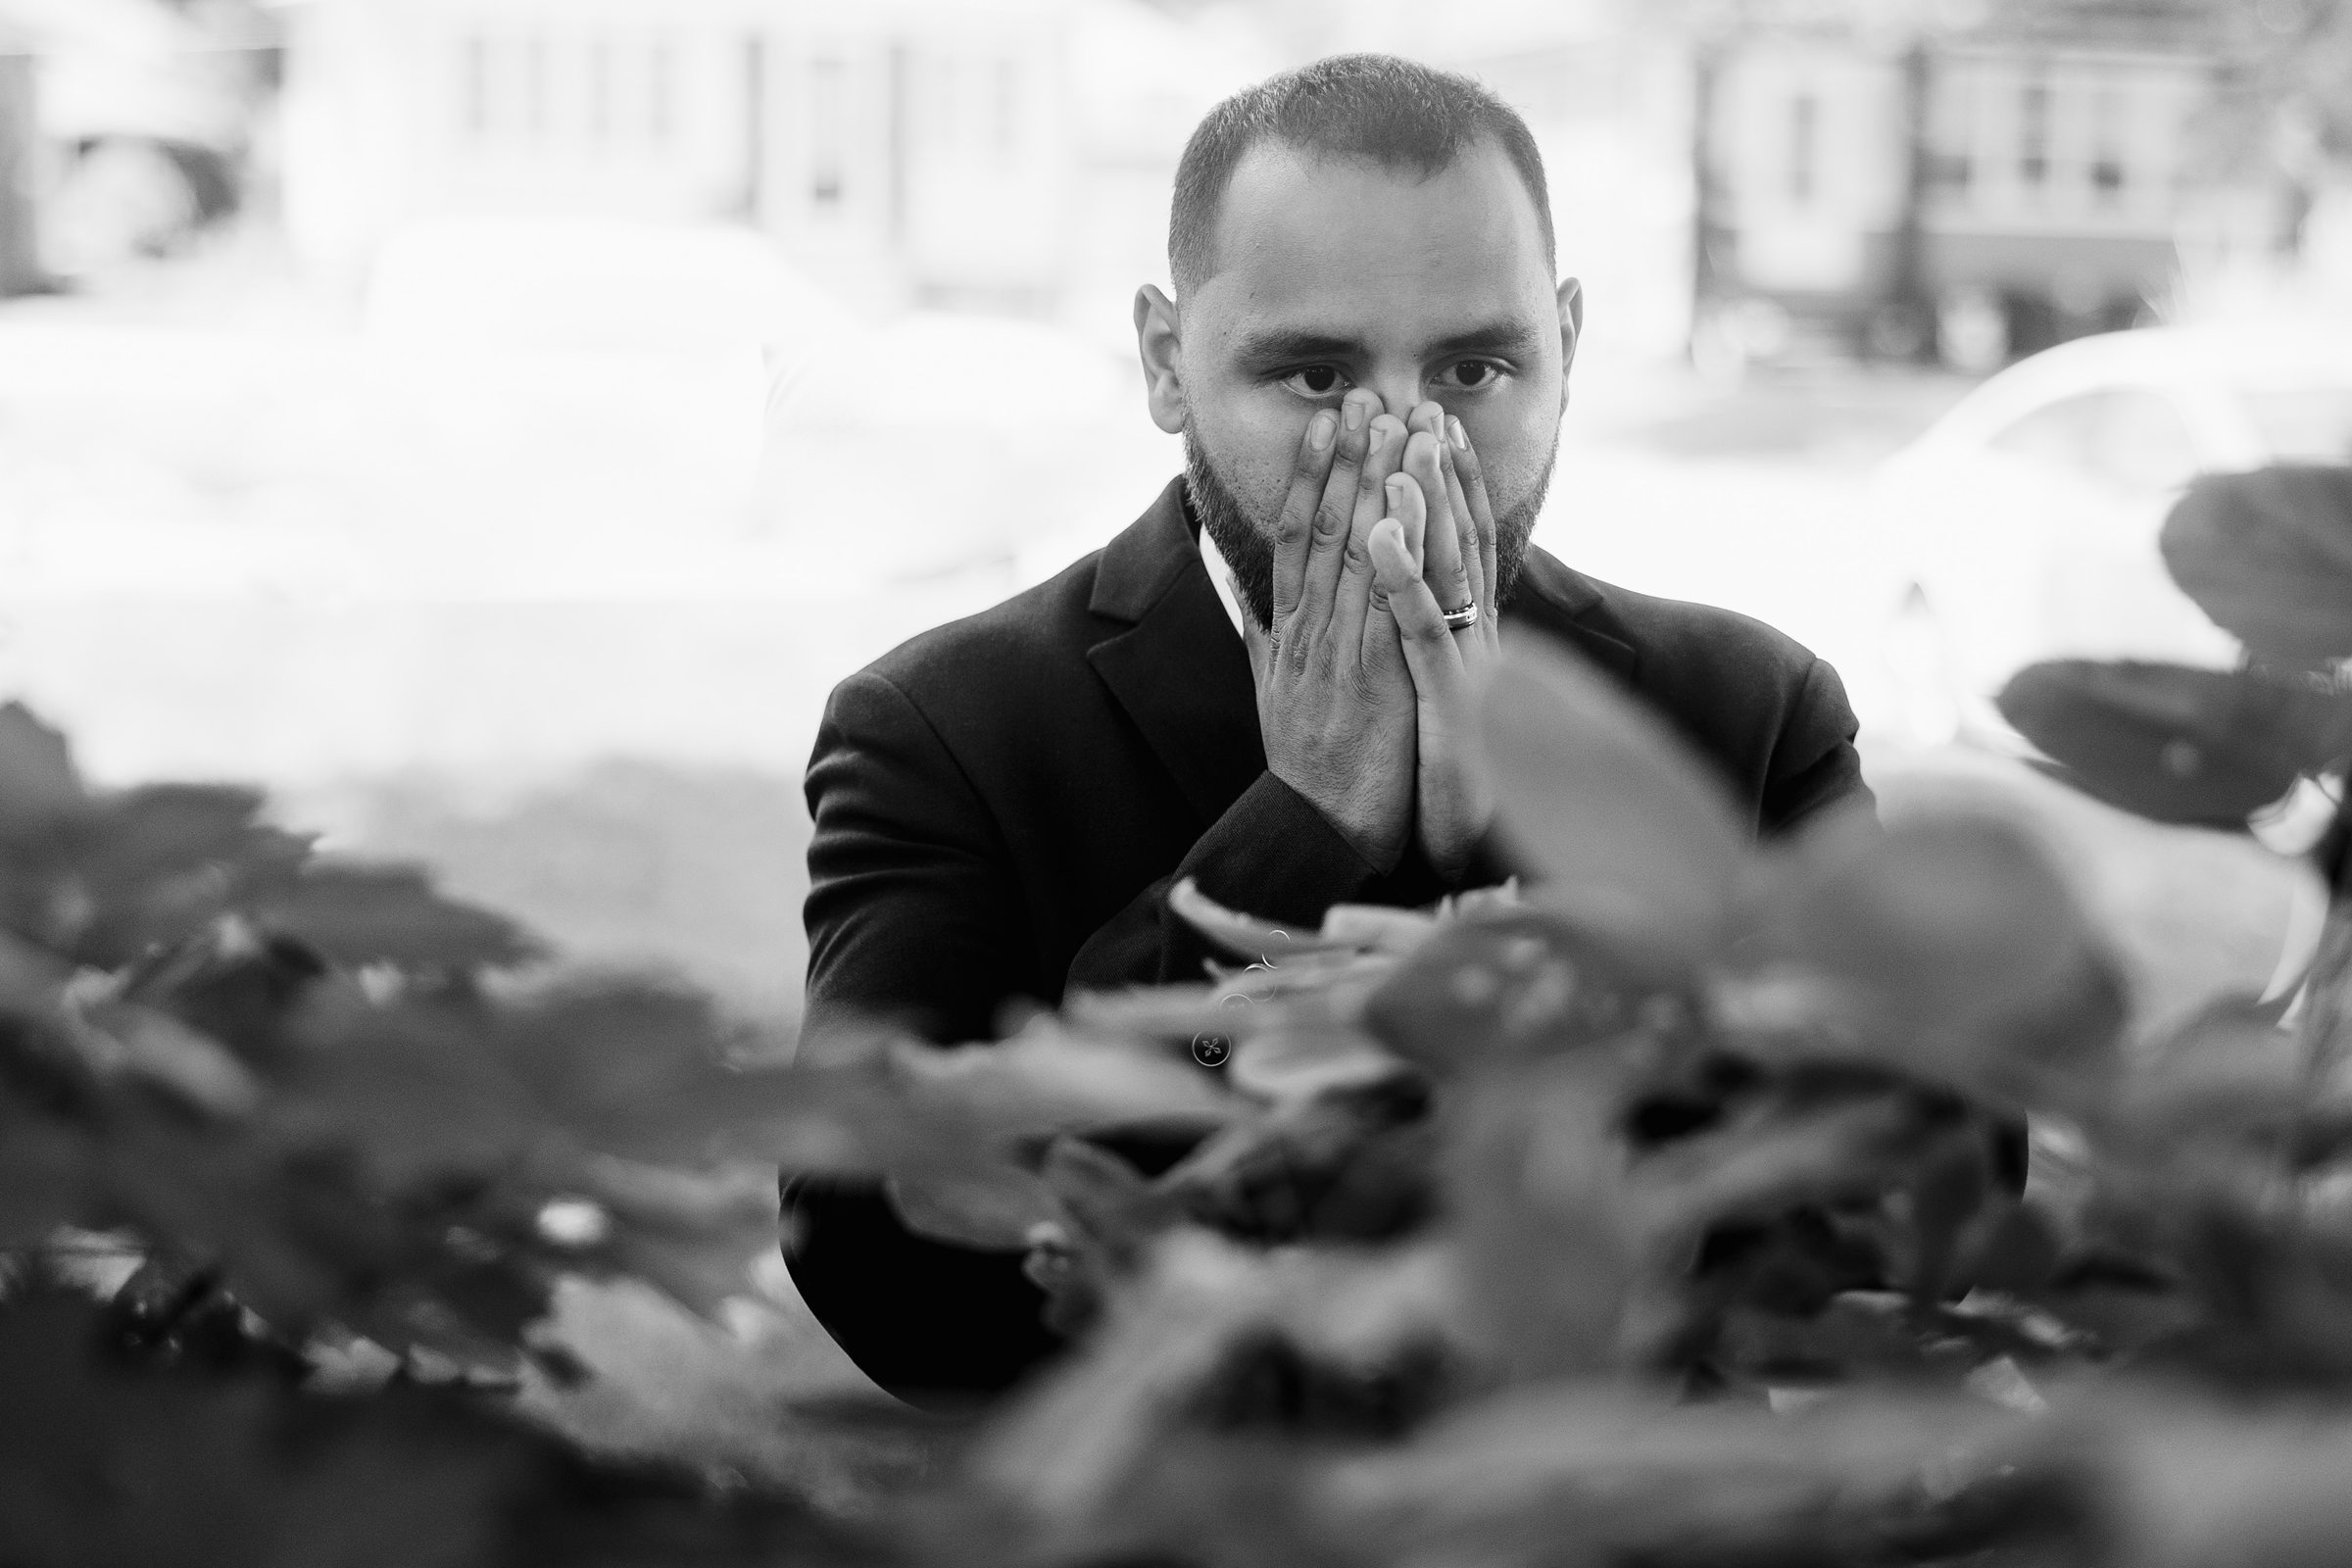 Groom gets emotional before his wedding at the Union Station in Joliet, Illinois.